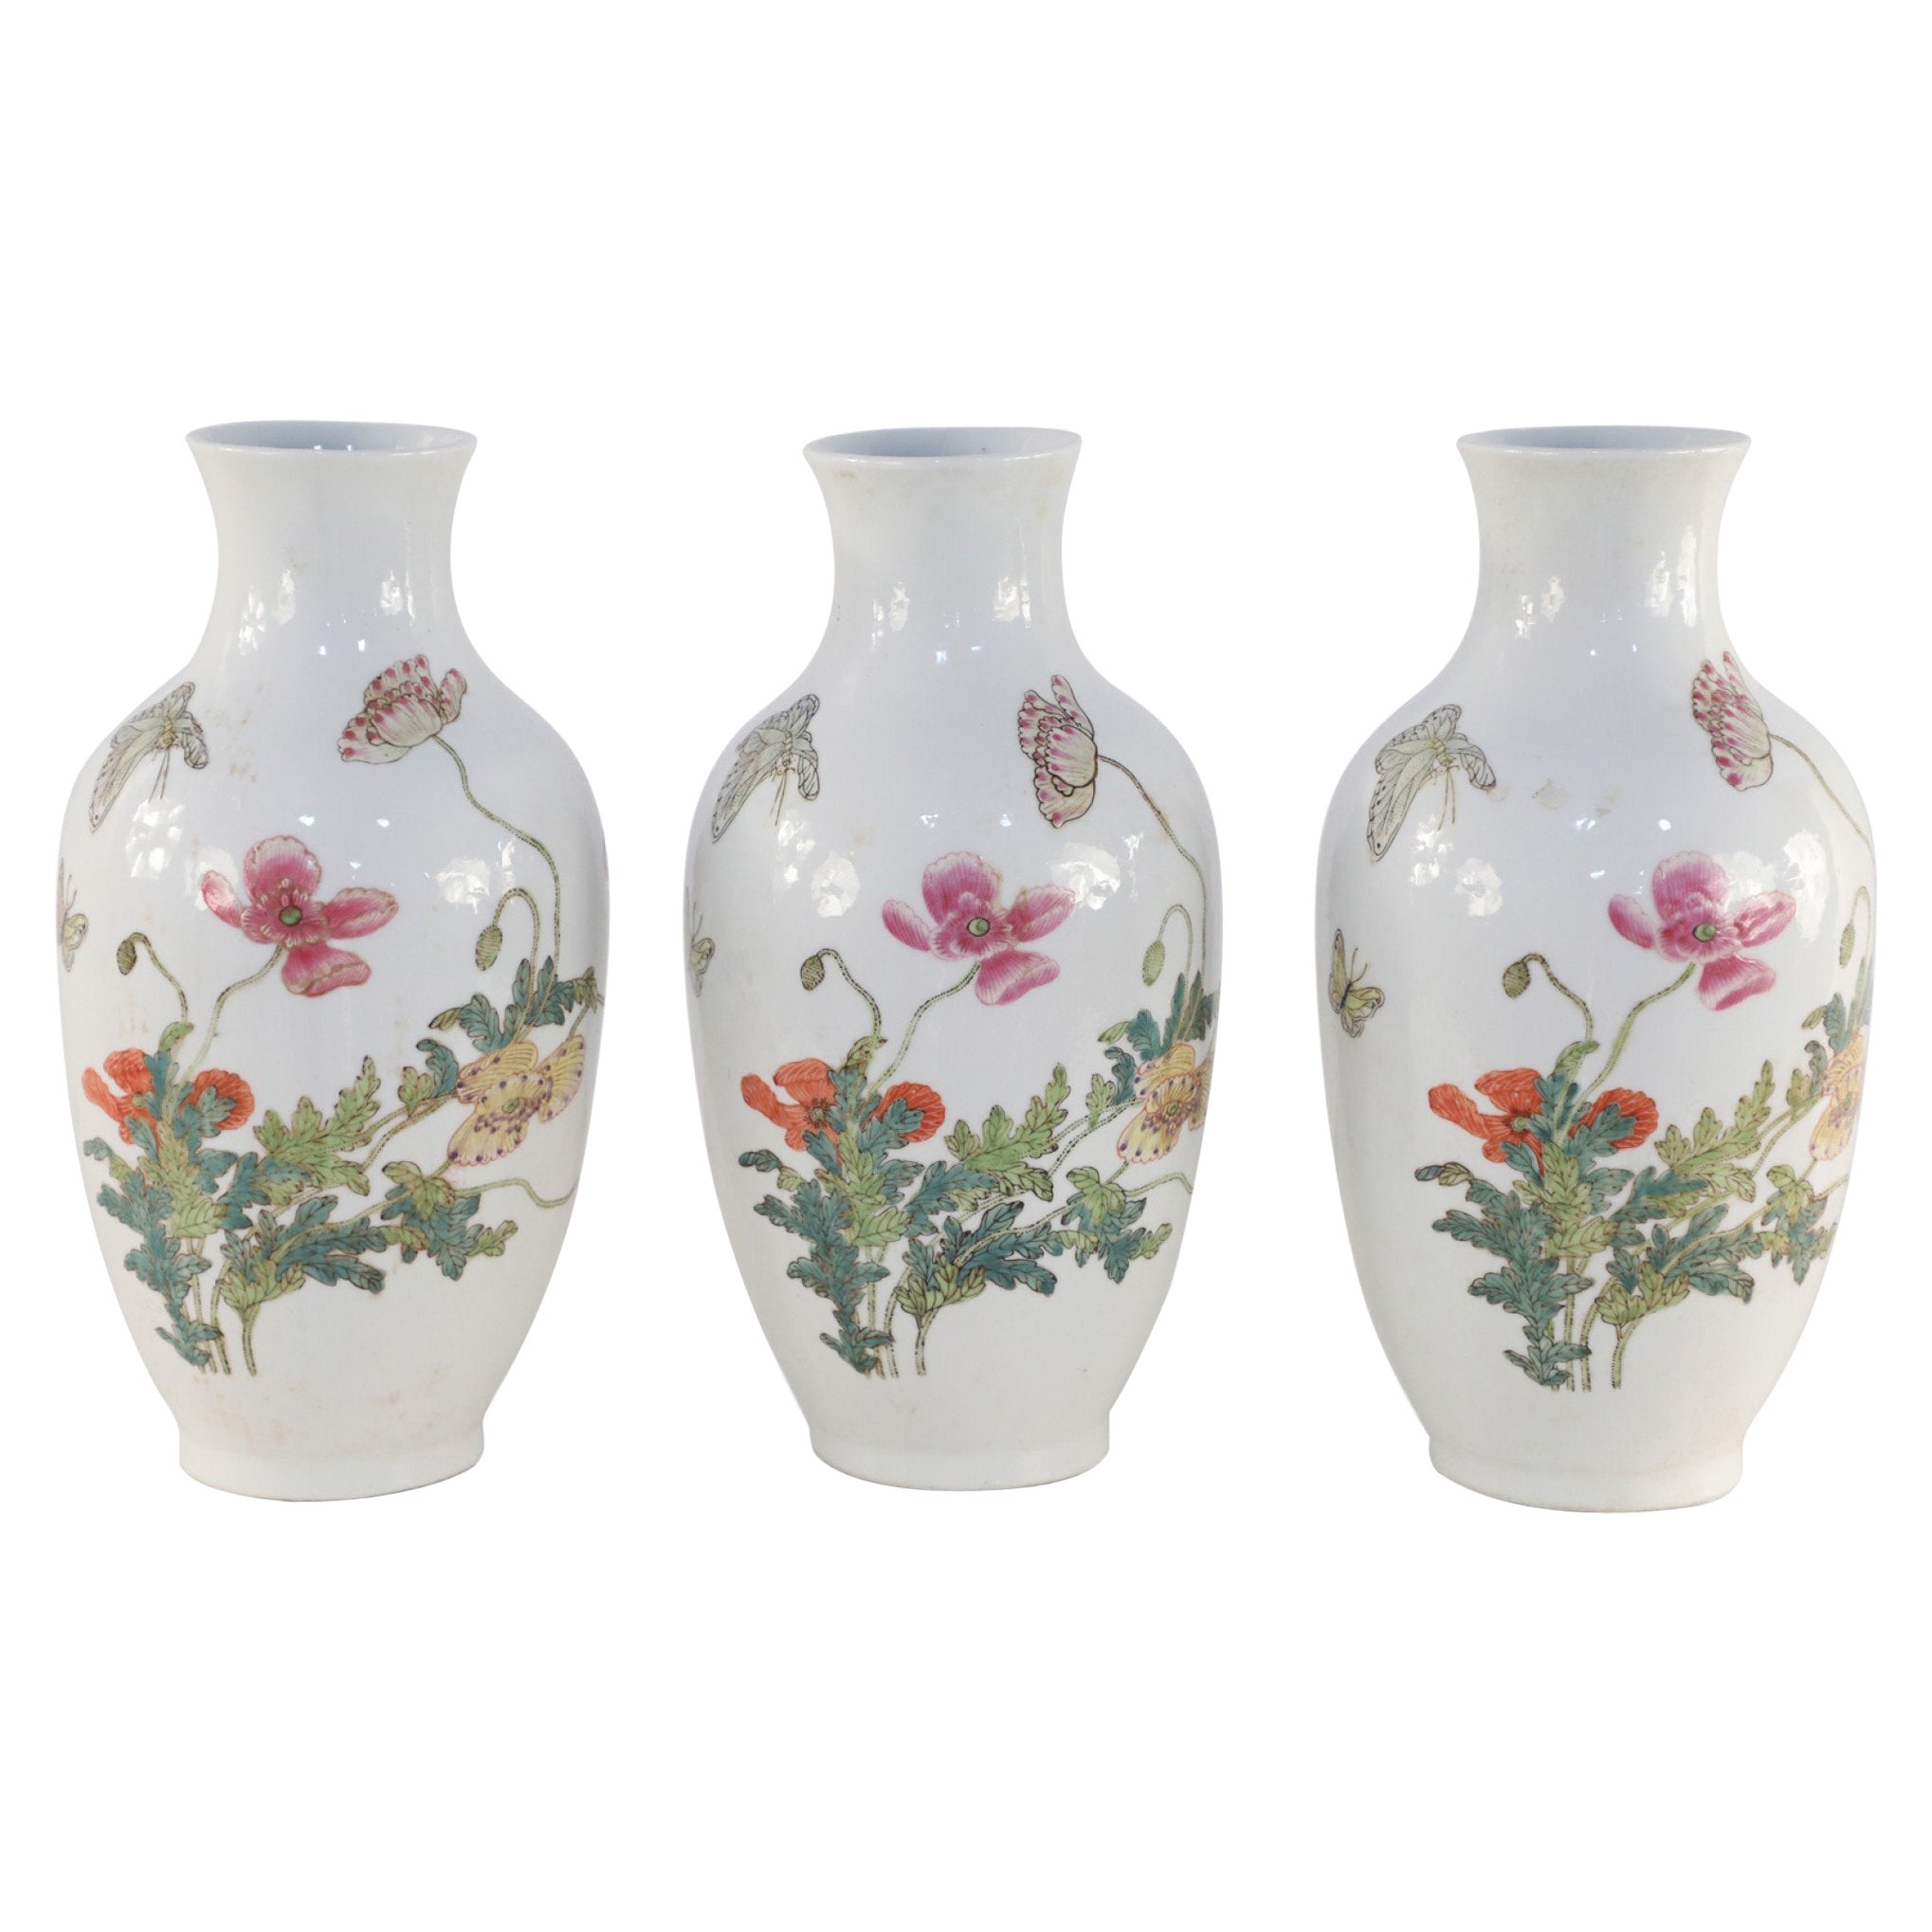 Chinese White Floral and Butterfly Patterned Porcelain Vases For Sale